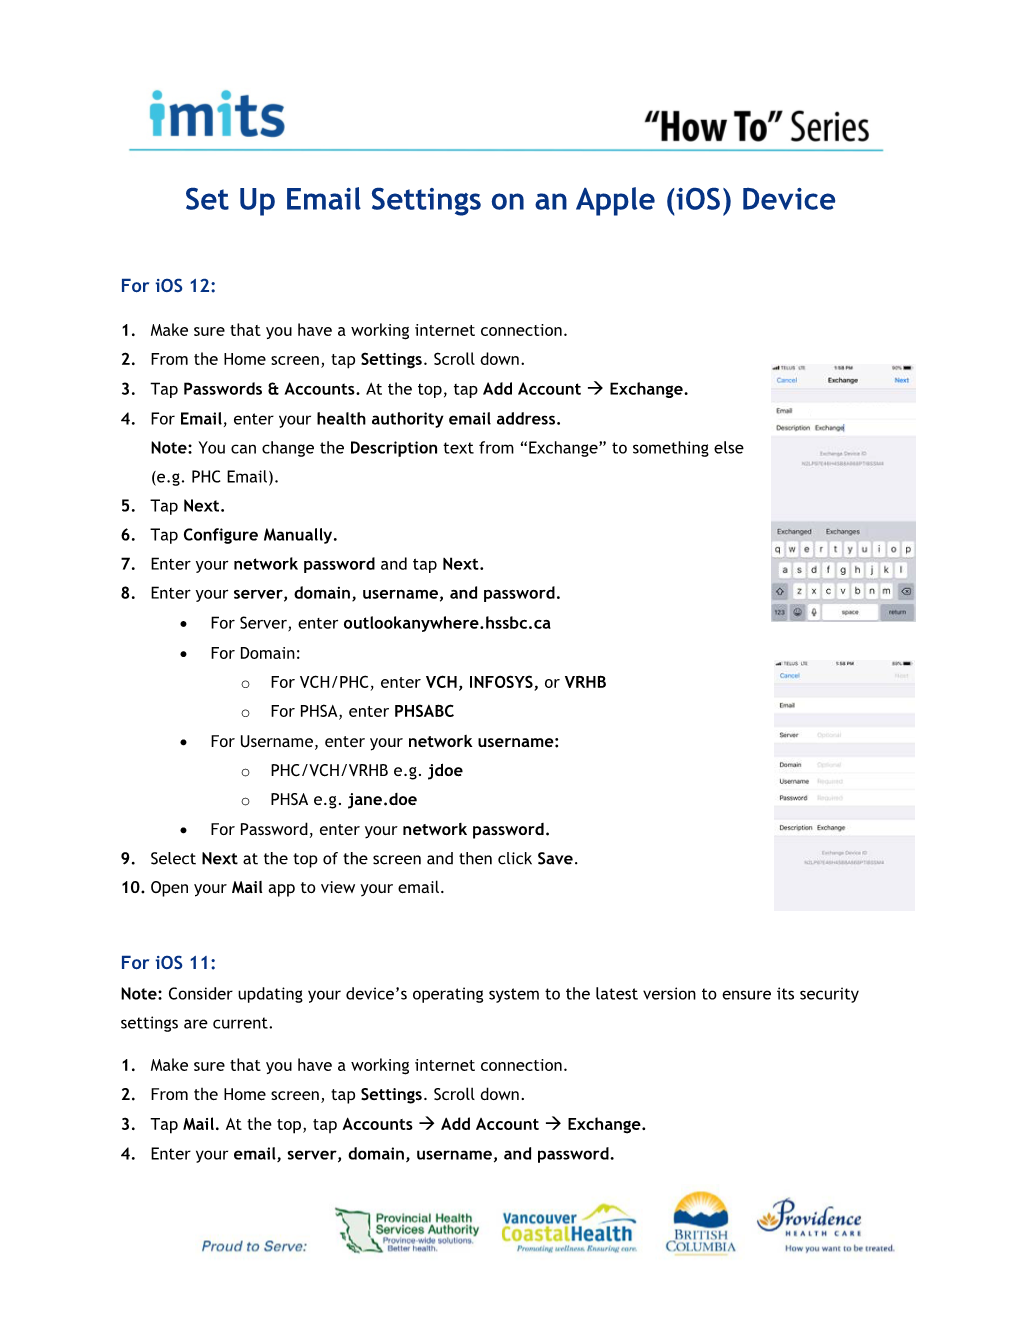 Set up Email Settings on an Apple (Ios) Device